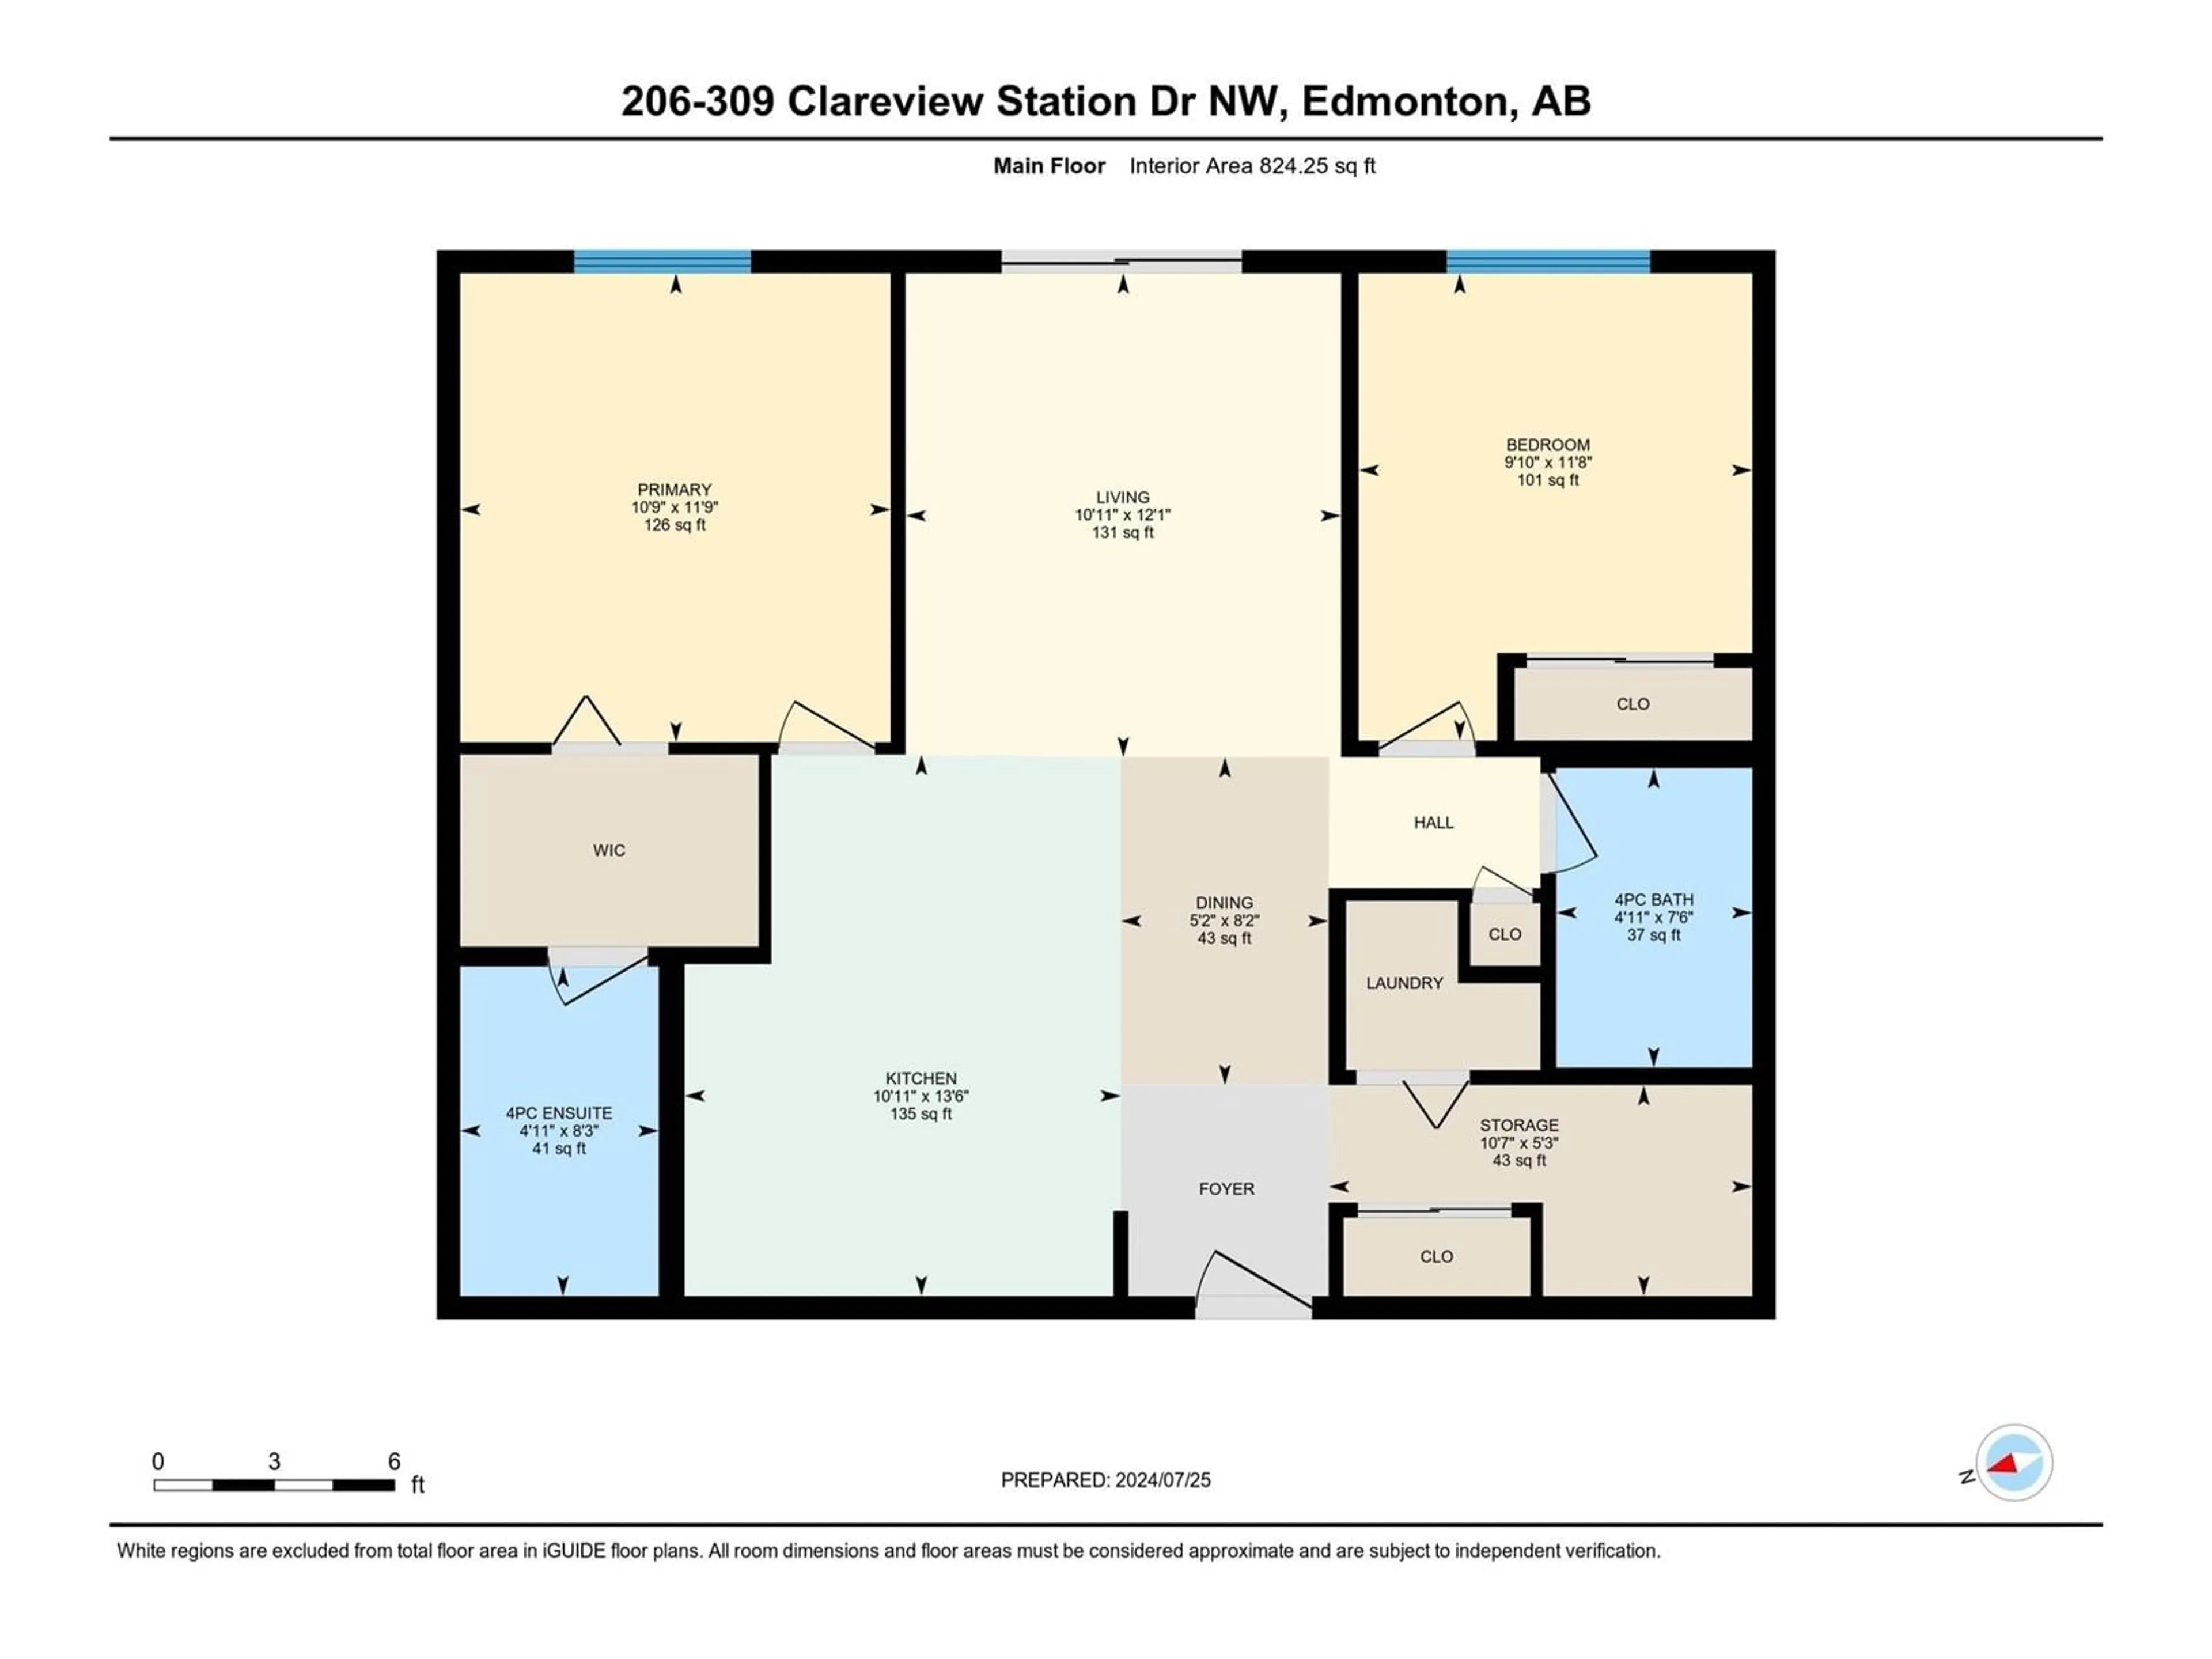 Floor plan for #206 309 Clareview Station Dr ST NW NW, Edmonton Alberta T5Y0C5